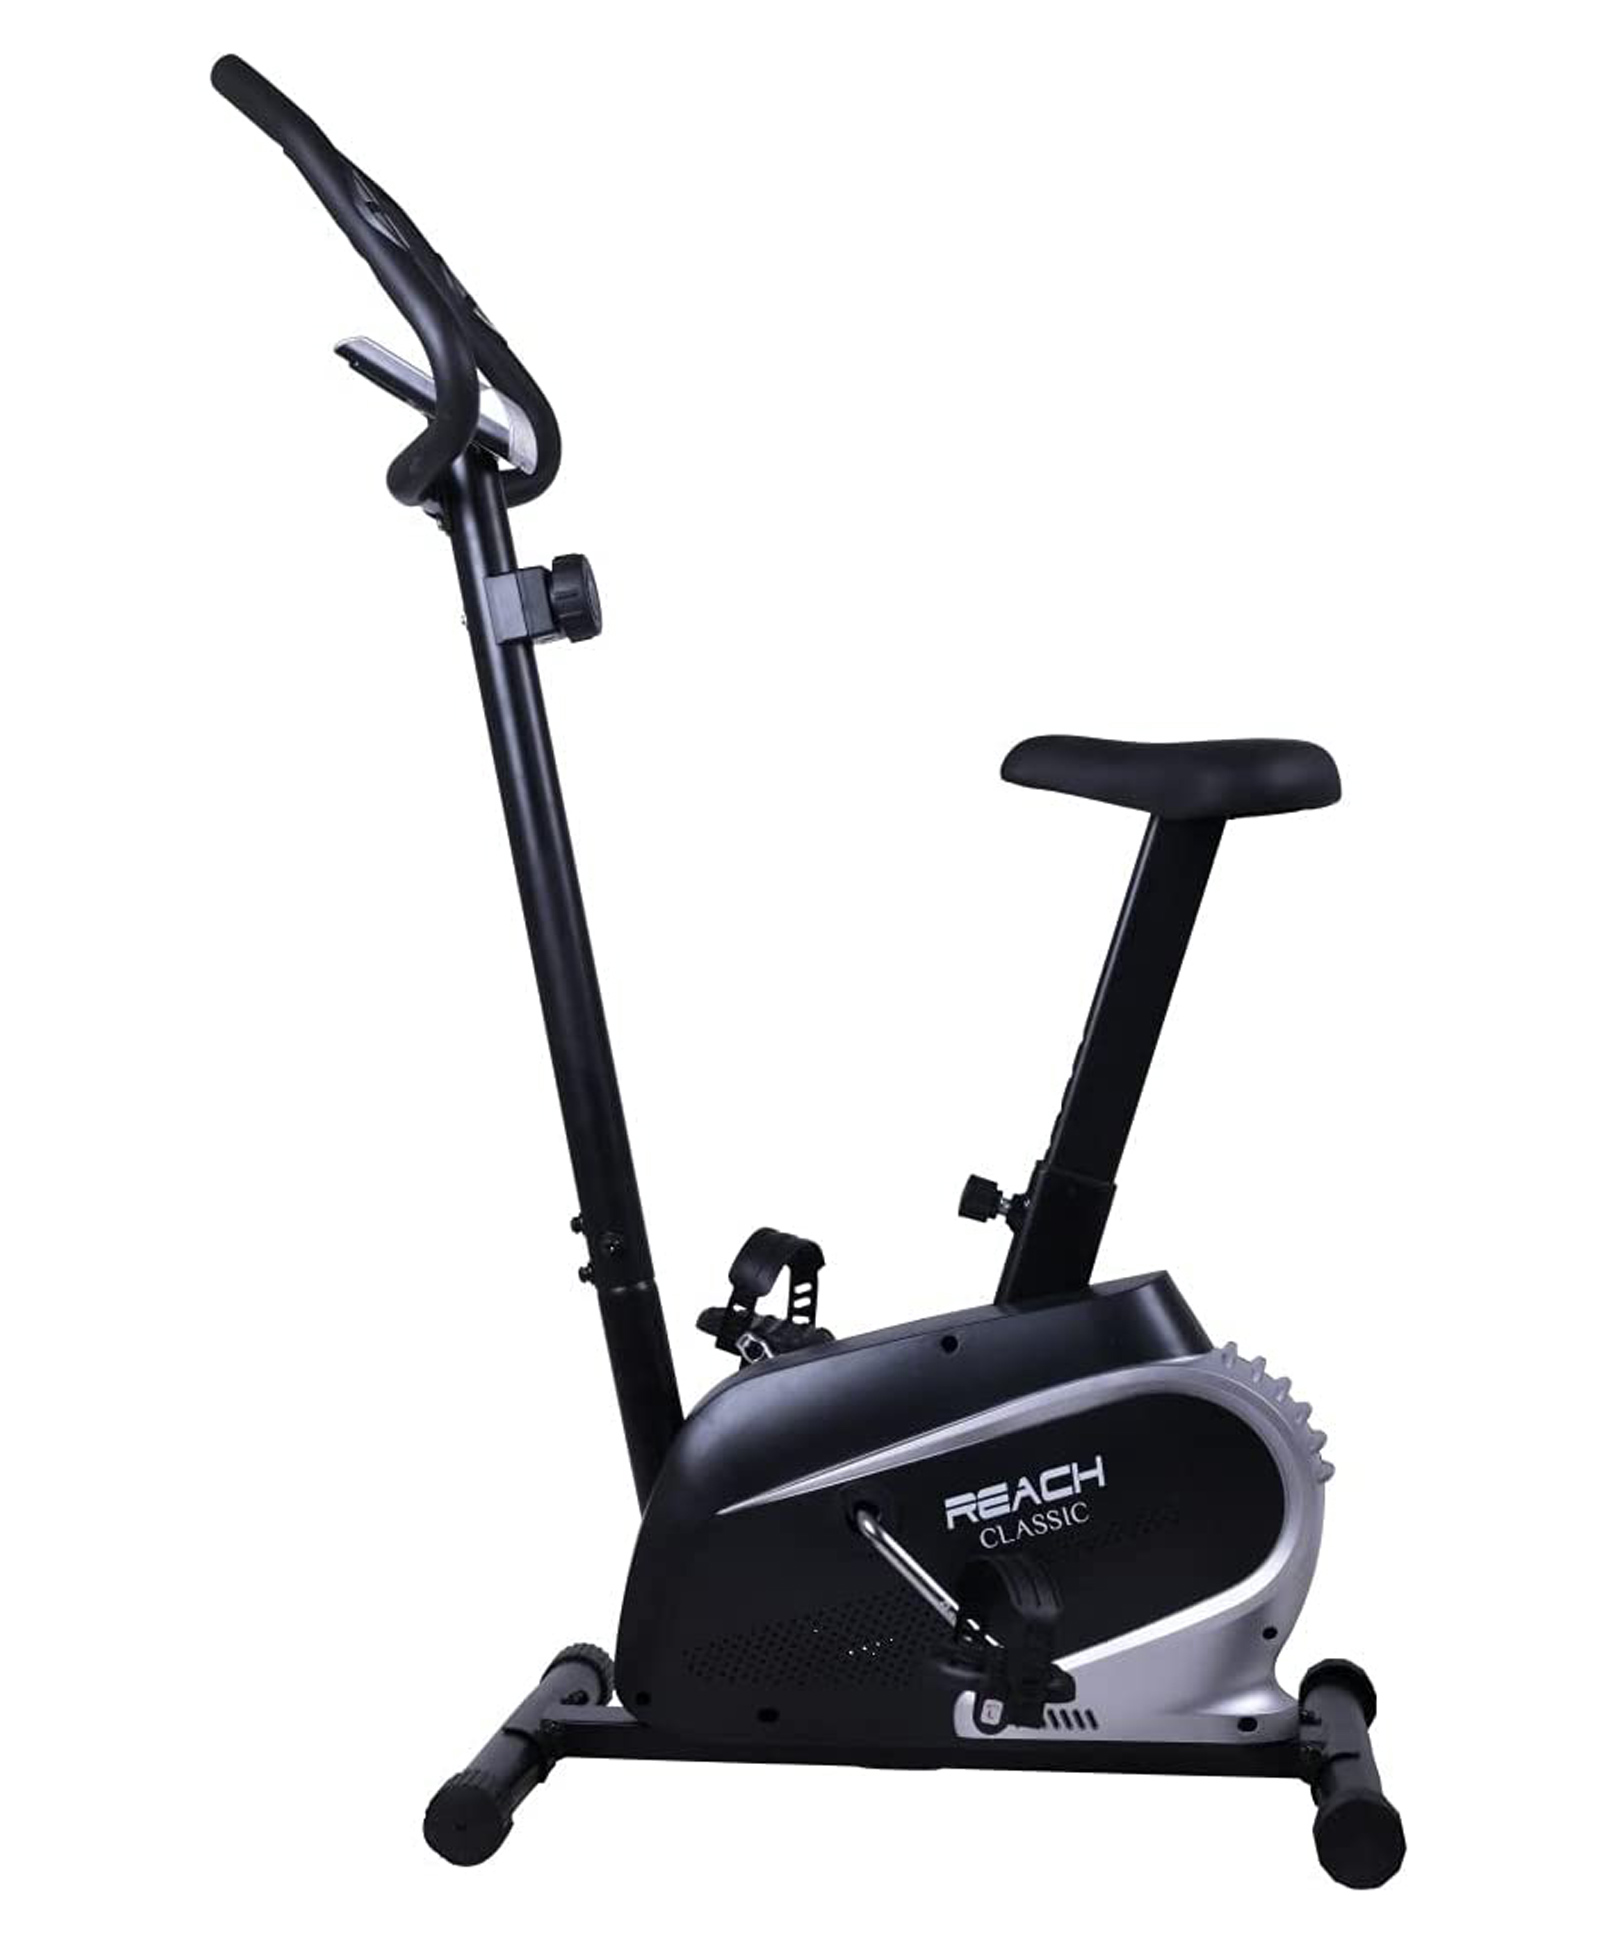 lago Titicaca Razón Calle Reach B 201 Magnetic Exercise Cycle For Home Gym Indoor Upright Stationary  Bike For Smooth Cycling Experience 8 Level of Magnetic Resistance - Black  Online in India, Buy at Best Price from